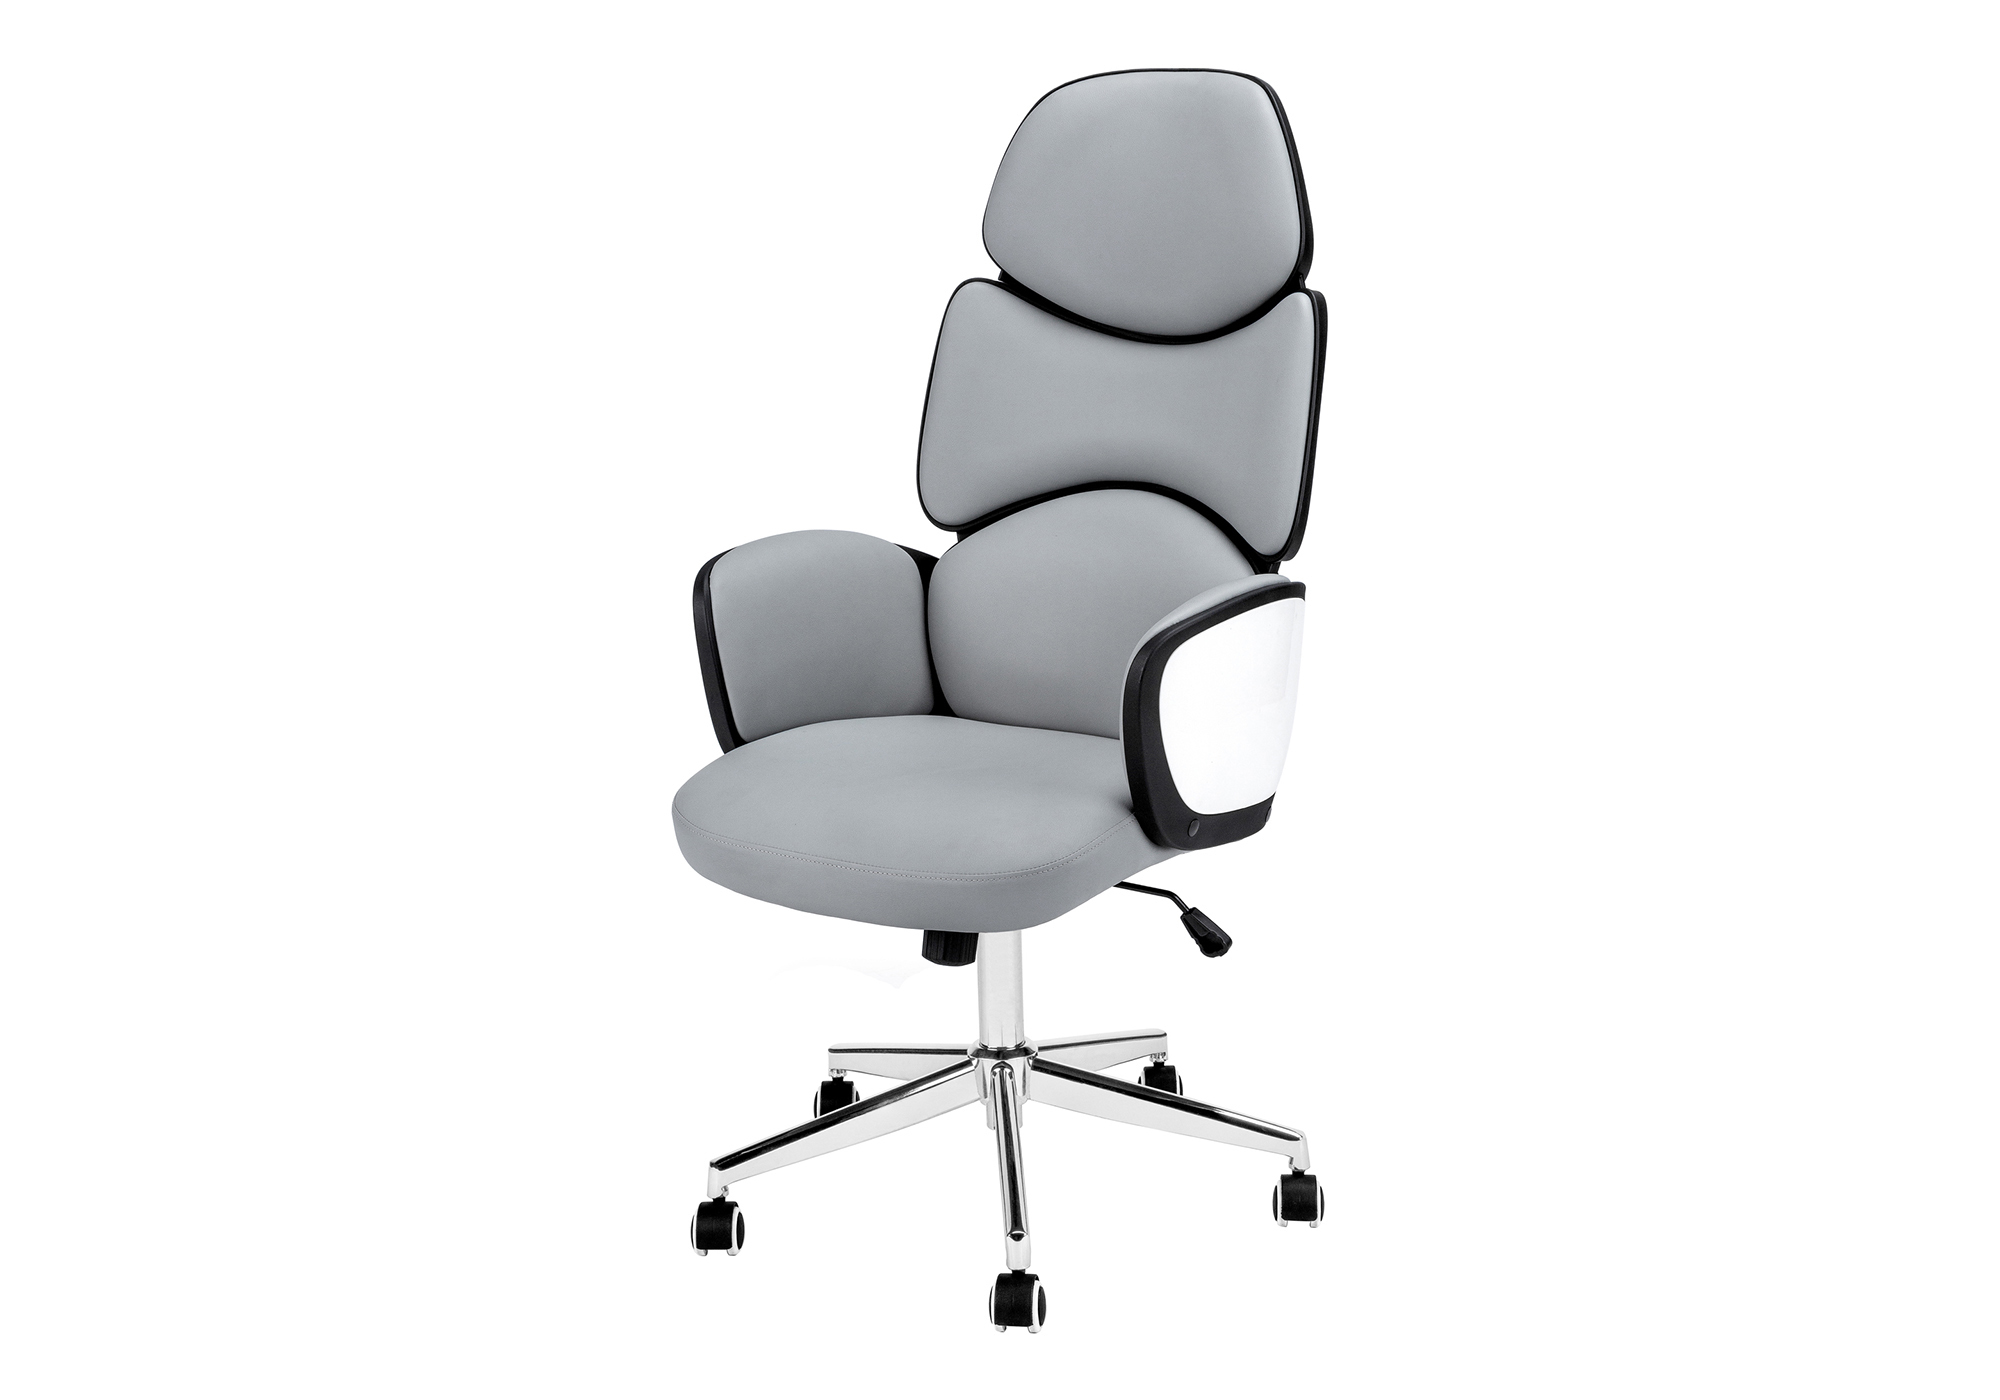 OFFICE CHAIR - GREY LEATHER-LOOK / HIGH BACK EXECUTIVE